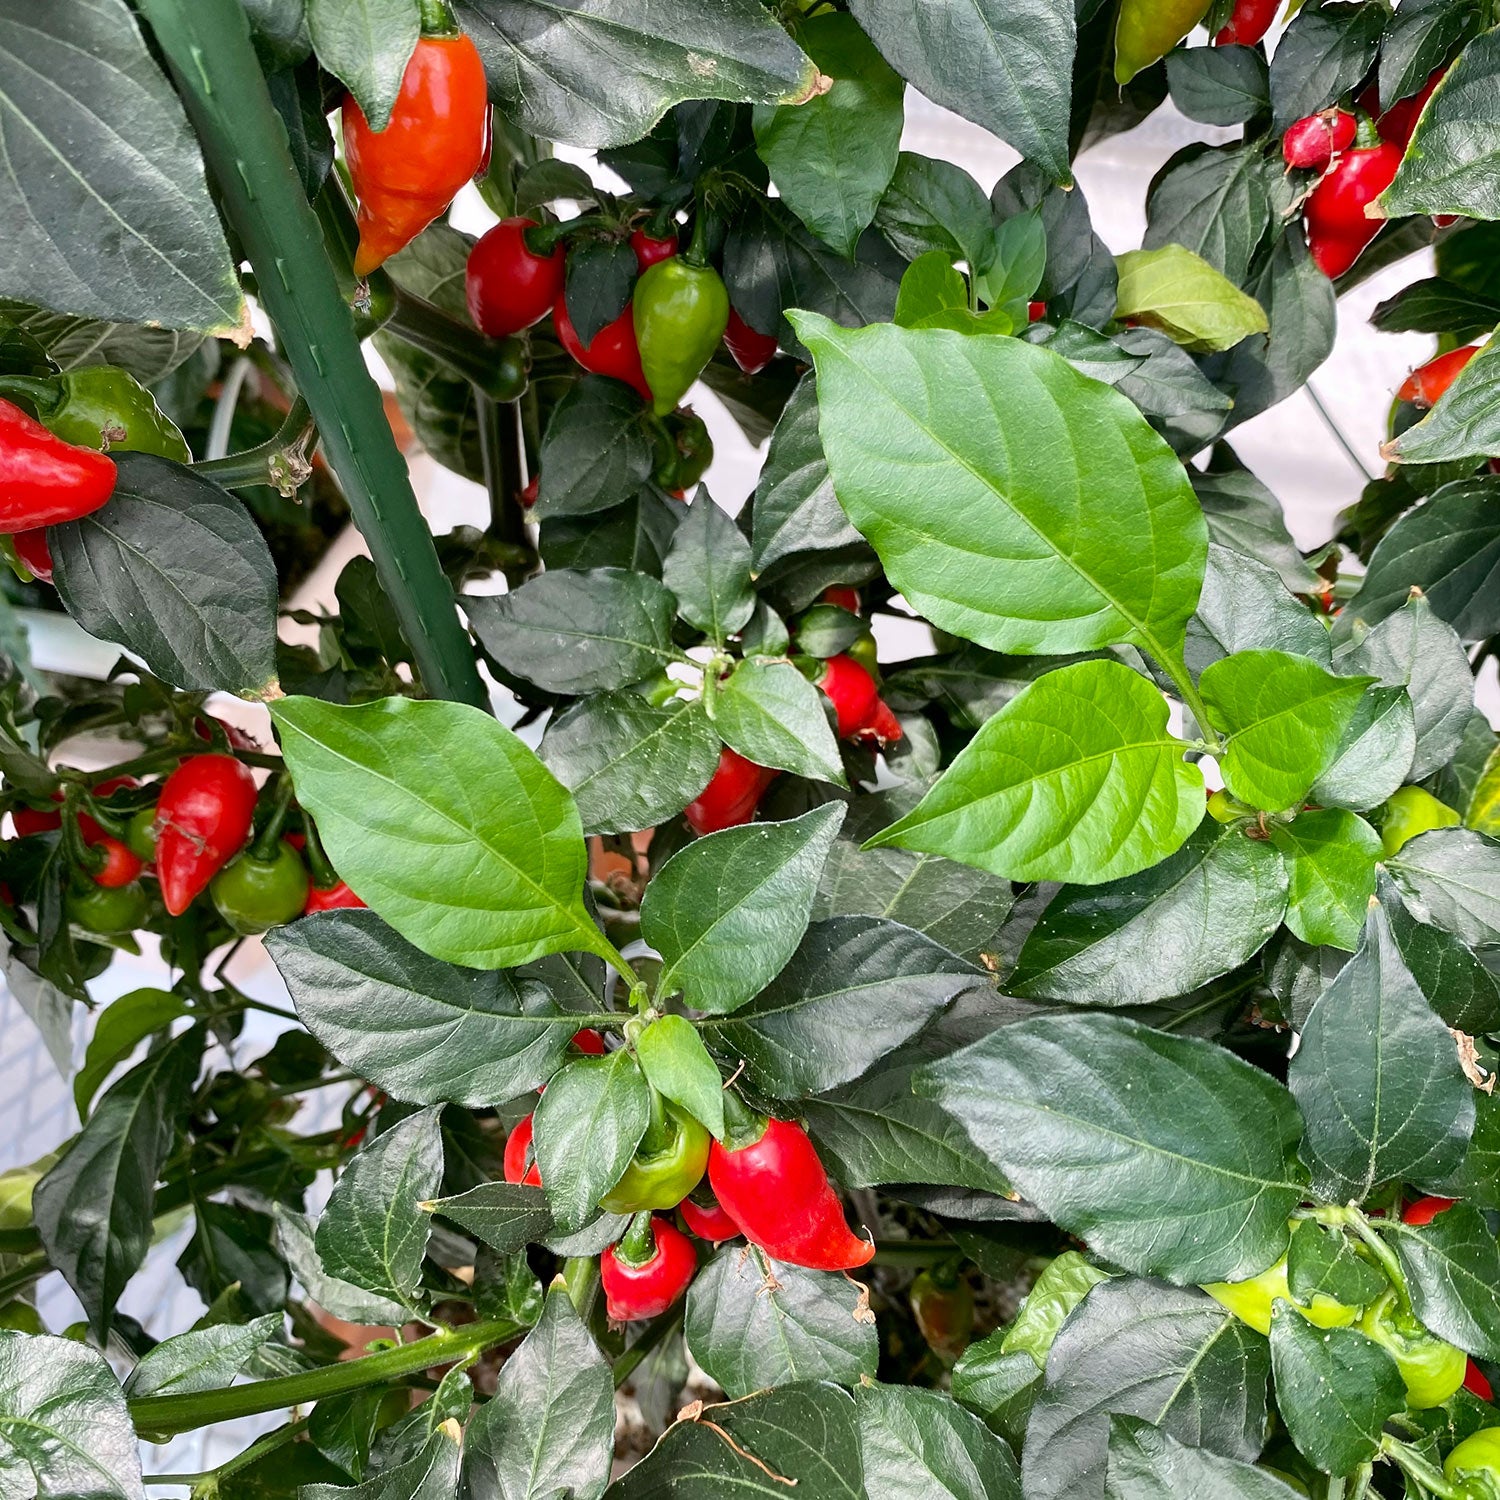 Pepper Joe's peppers for sale - hot peppers growing on plants image